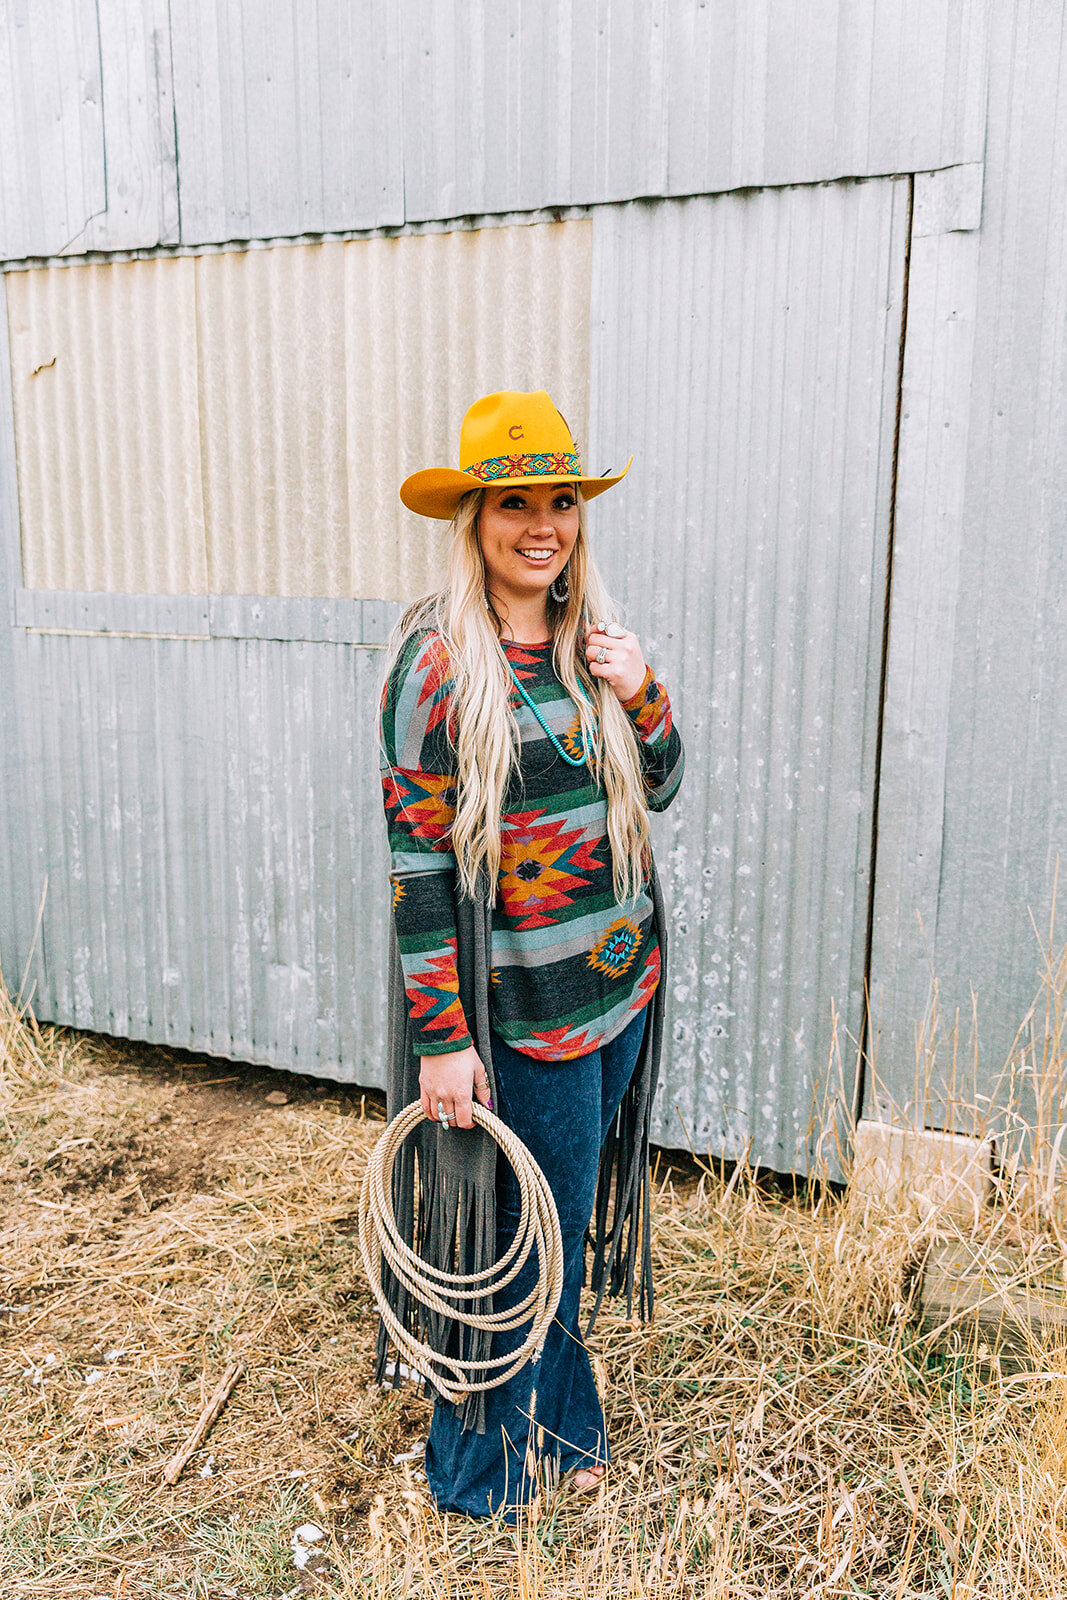  statement jewelry tassle cardigan native print shirt bold yellow cowgirl hat lasso denim long hairstyles hair and makeup inspiration country style professional photographers in utah commercial photographers in utah horses wild rag boutique commercia